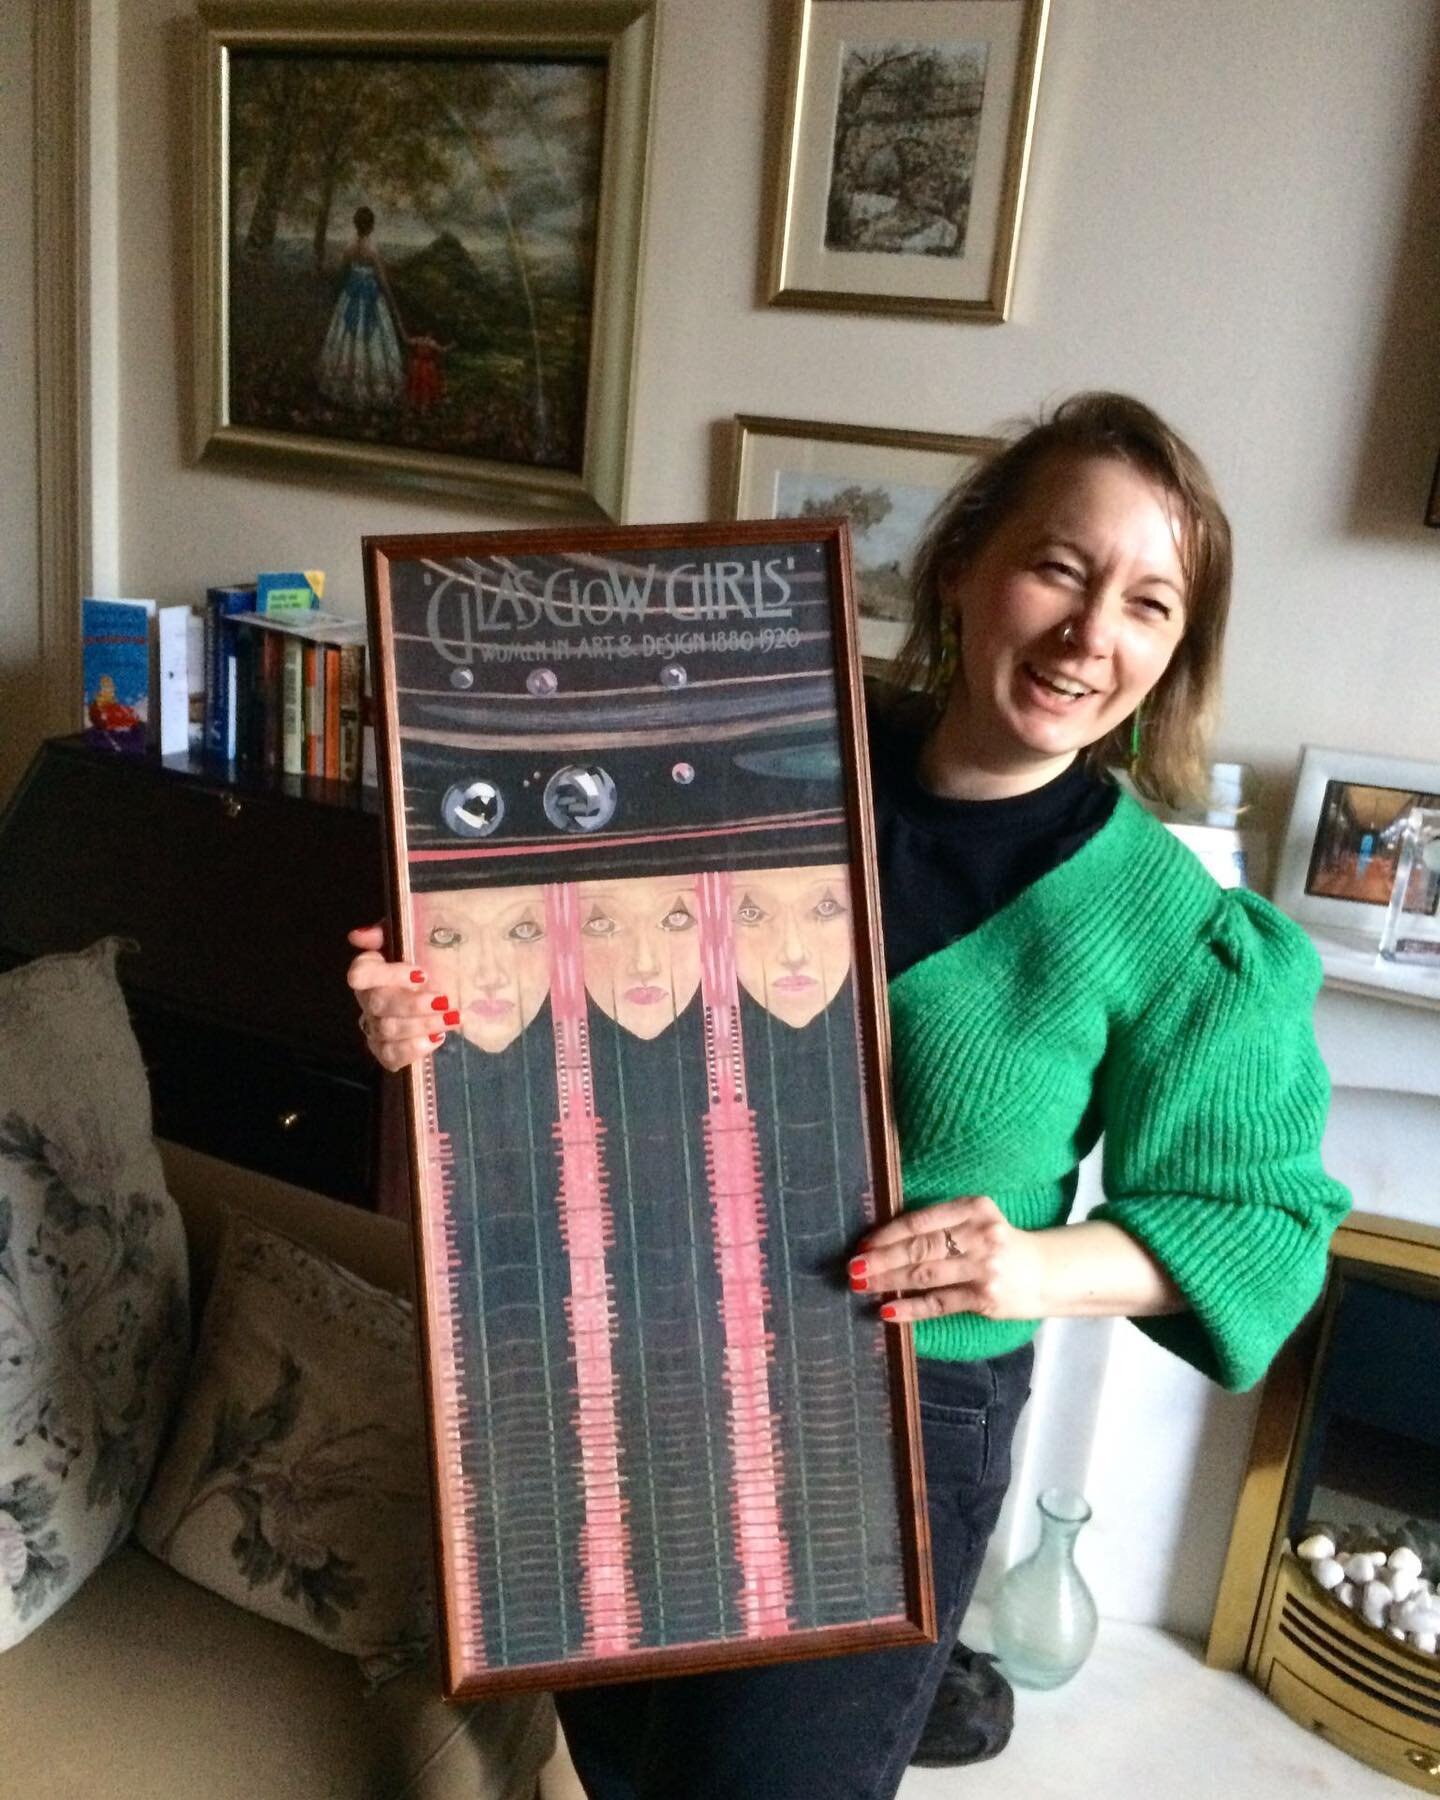 I usually try to not post stuff about me/featuring me on this account but I had the best day afternoon with @sharonthomasart &amp; Jean McFadden (what an absolute legend). I mean, look at my face getting my hands on an original &lsquo;Glasgow Girls&r